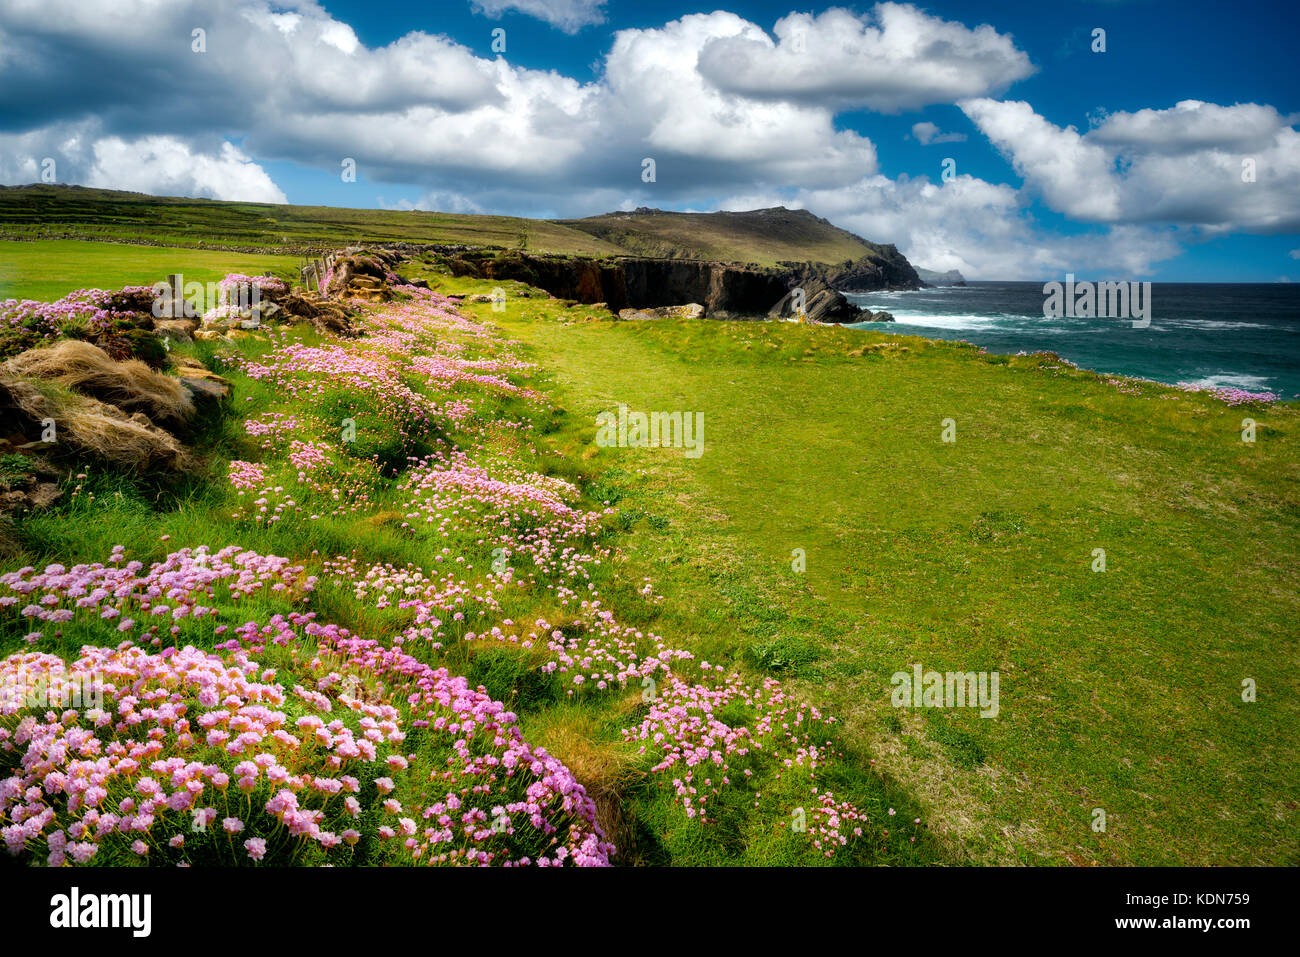 Flowers and coastline at Clogher's Head. County Kerry, Ireland Stock Photo